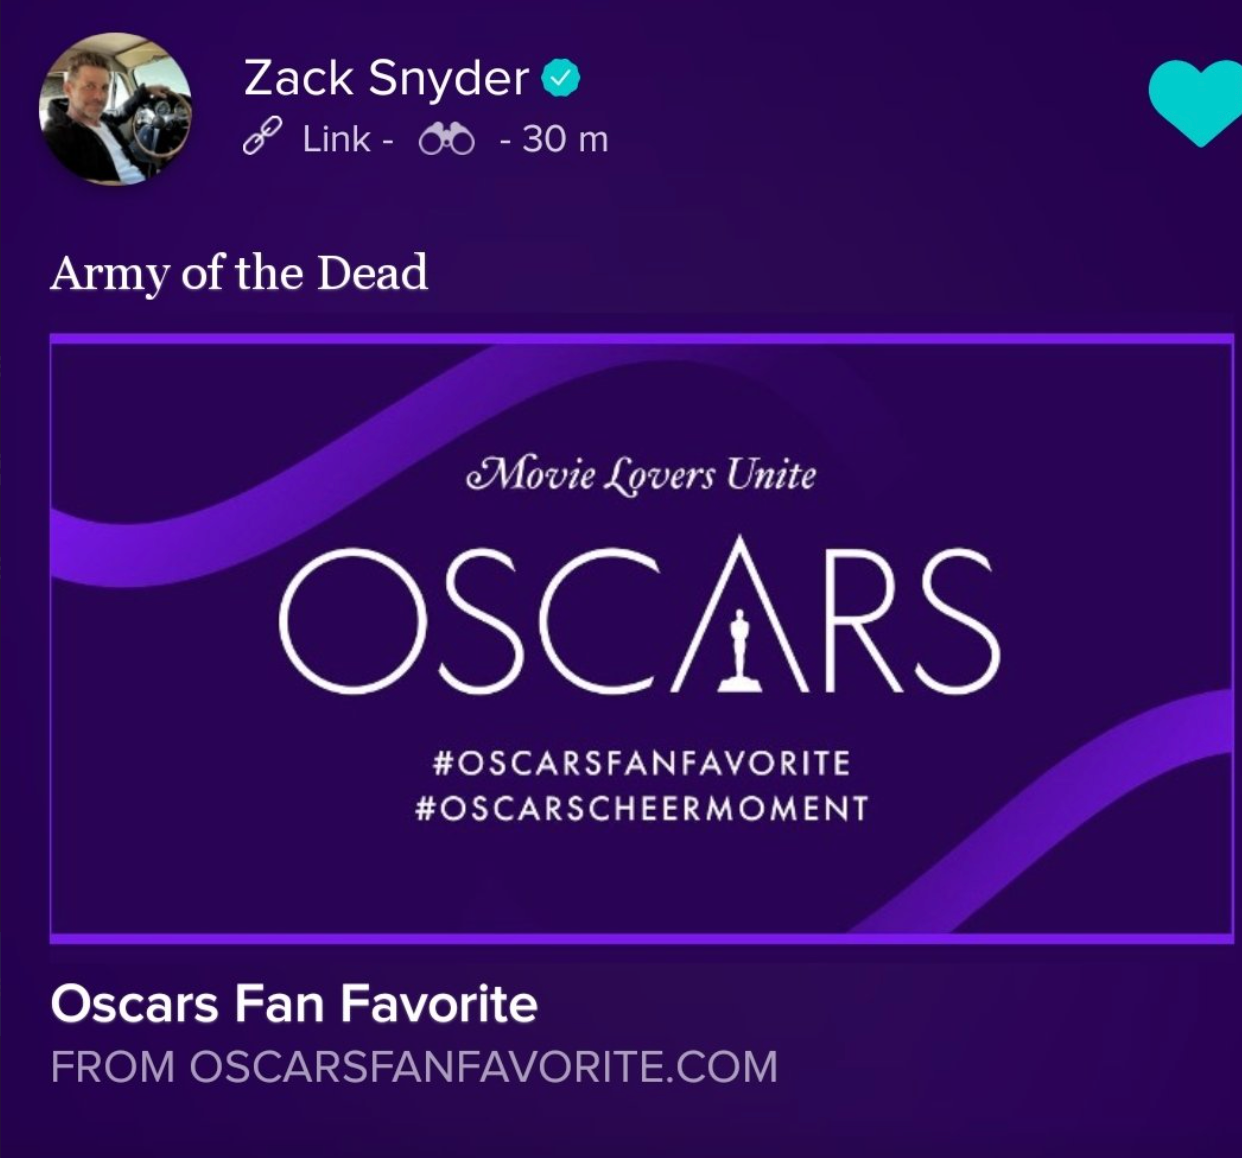 Zack Snyder’s loyal fans are now rallying to vote for ‘Army of the Dead’